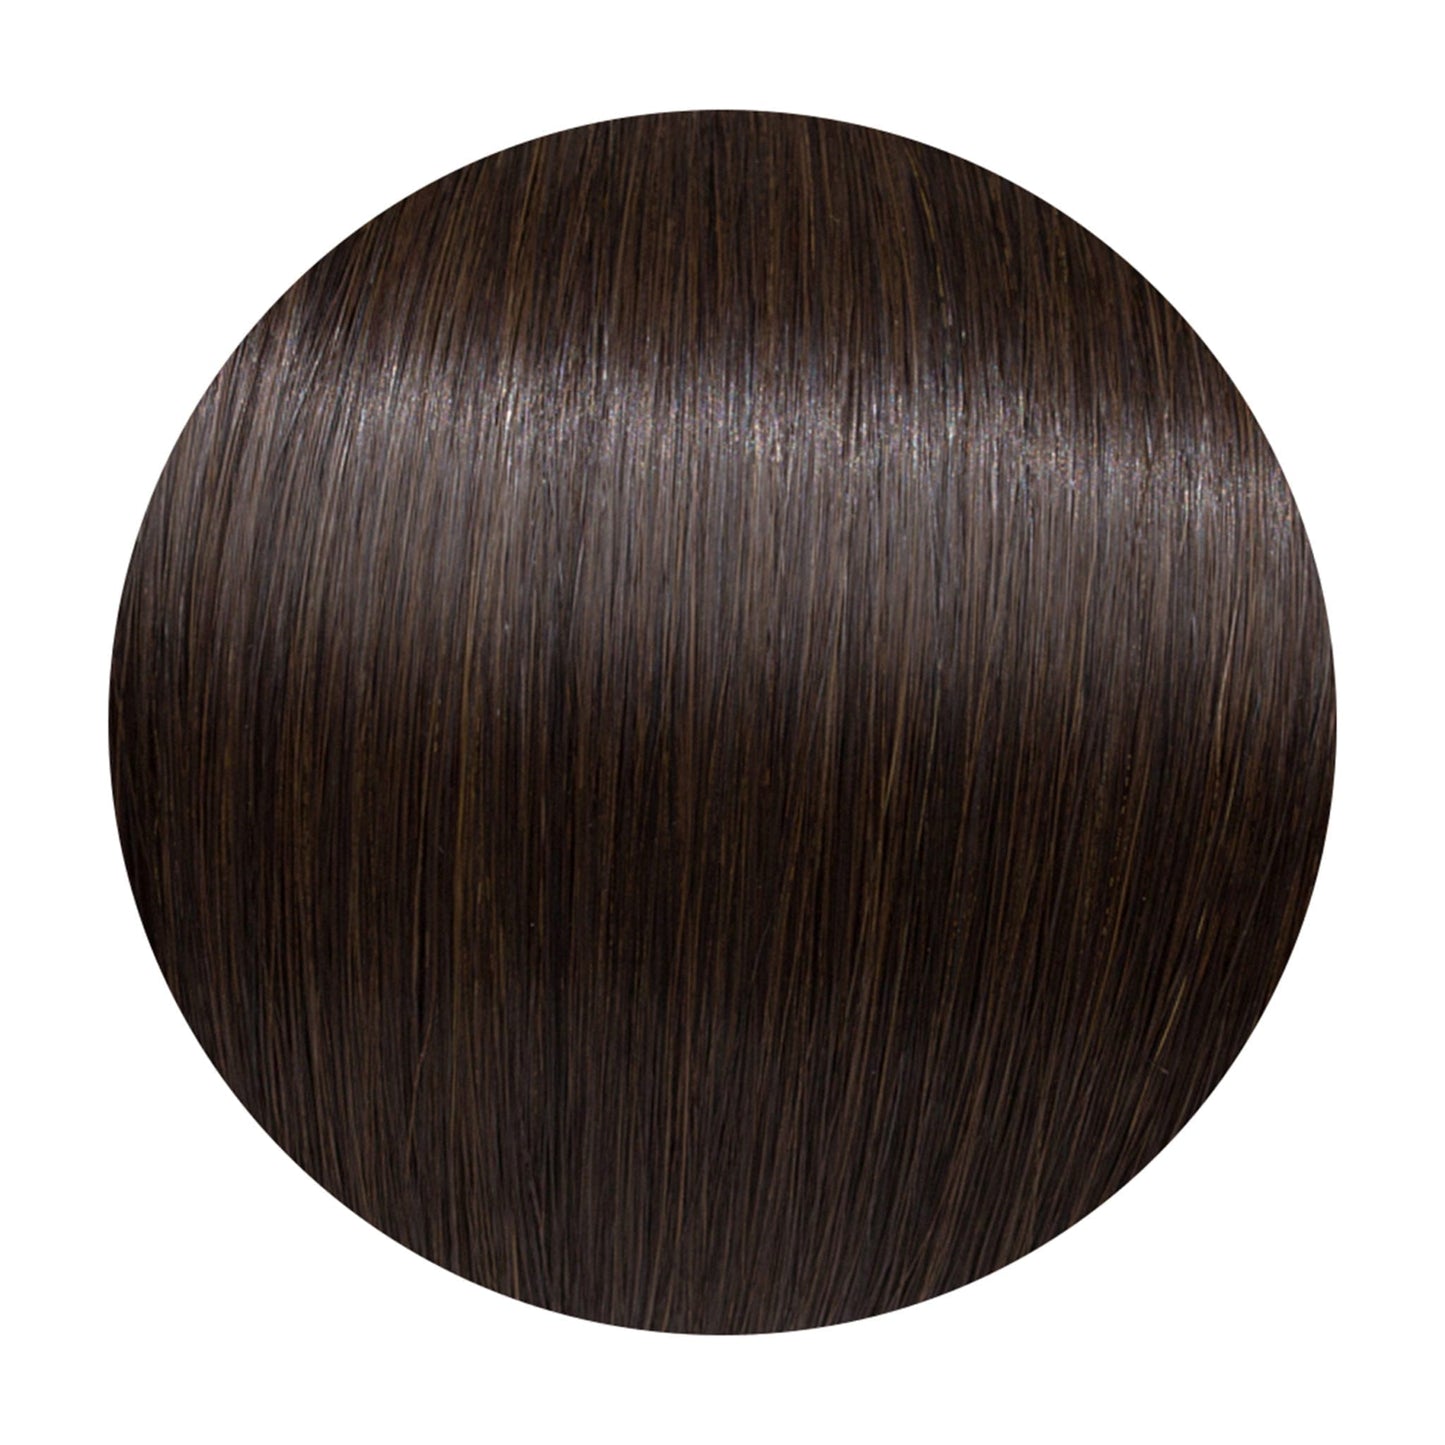 Seamless1 Caviar Human Hair in 1 Piece - shelley and co